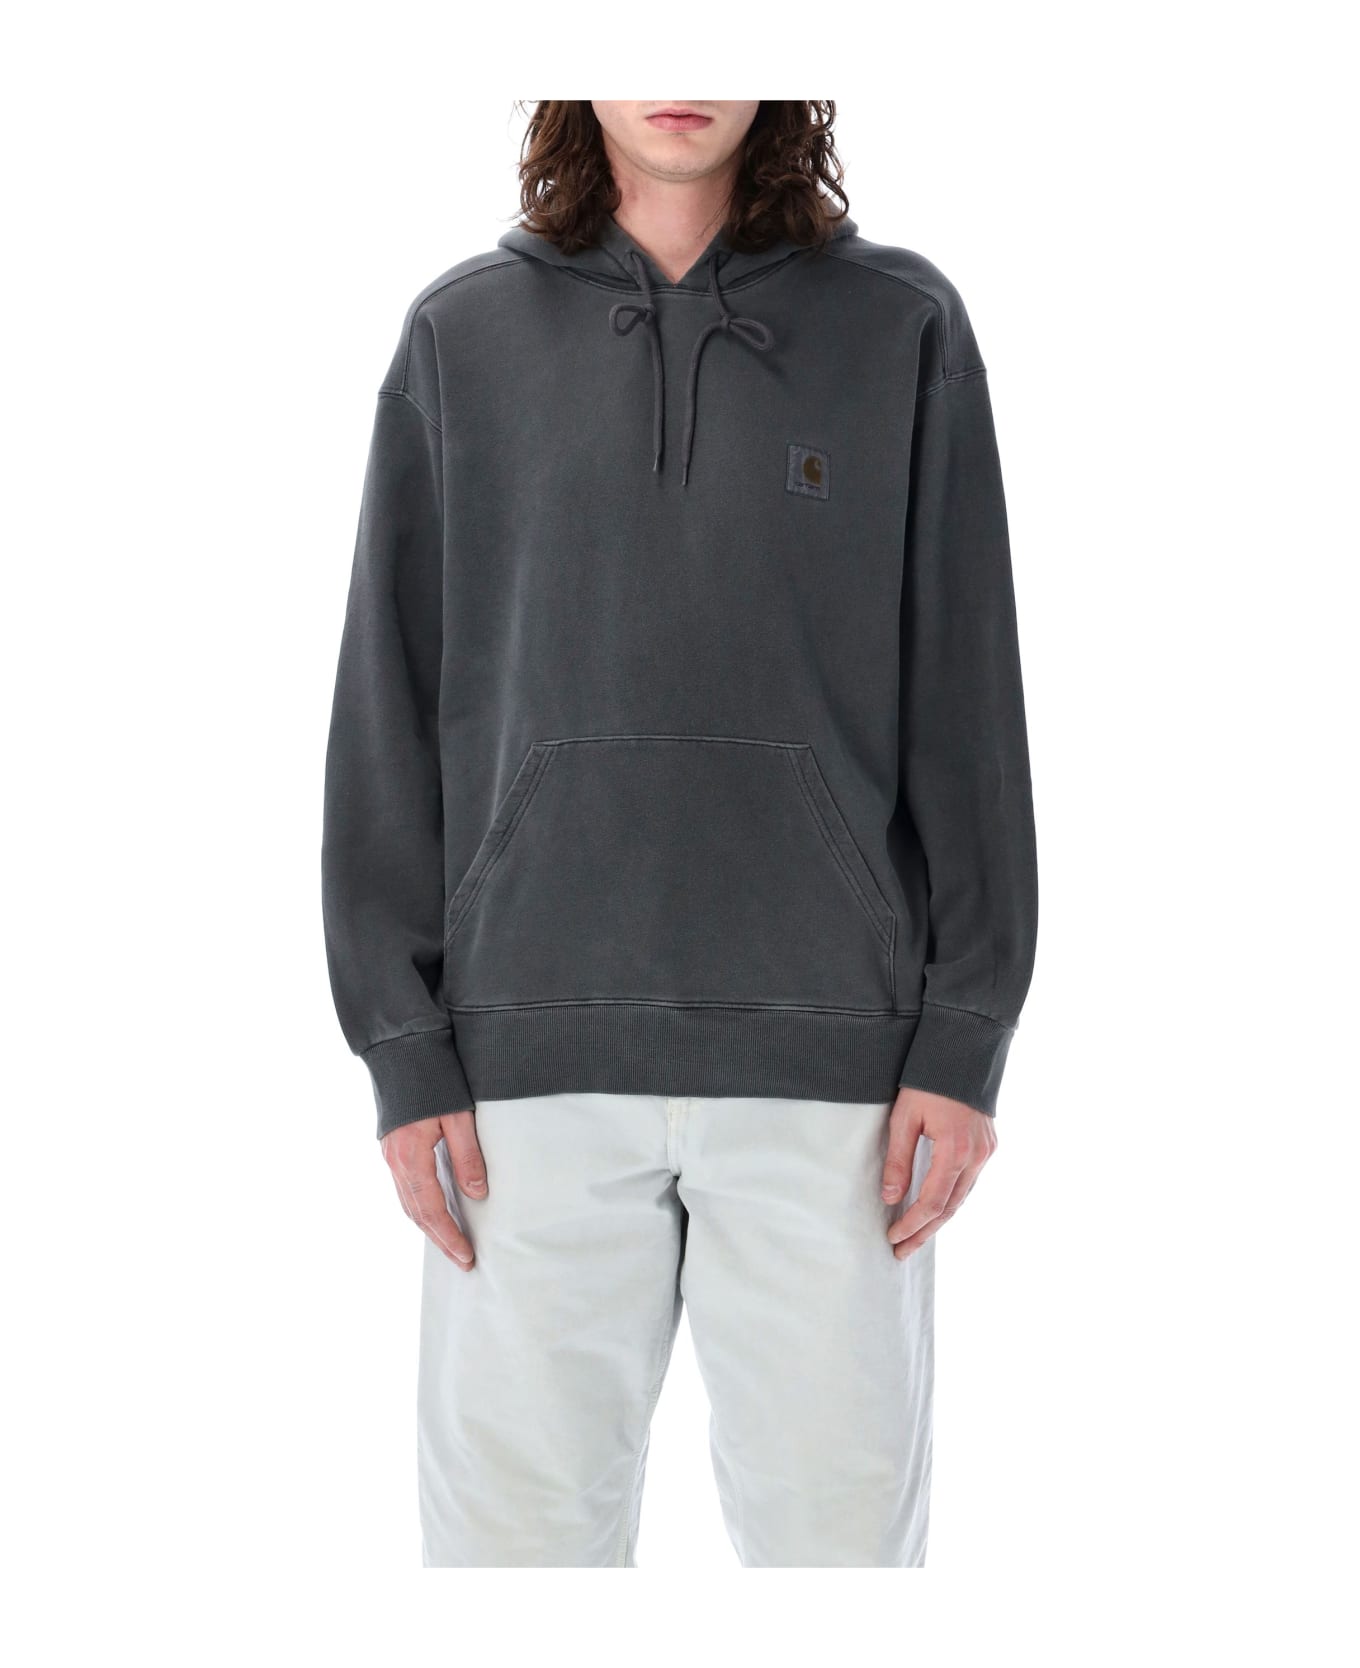 Carhartt Nelson Hoodie - CHARCOAL GARMENT DYED